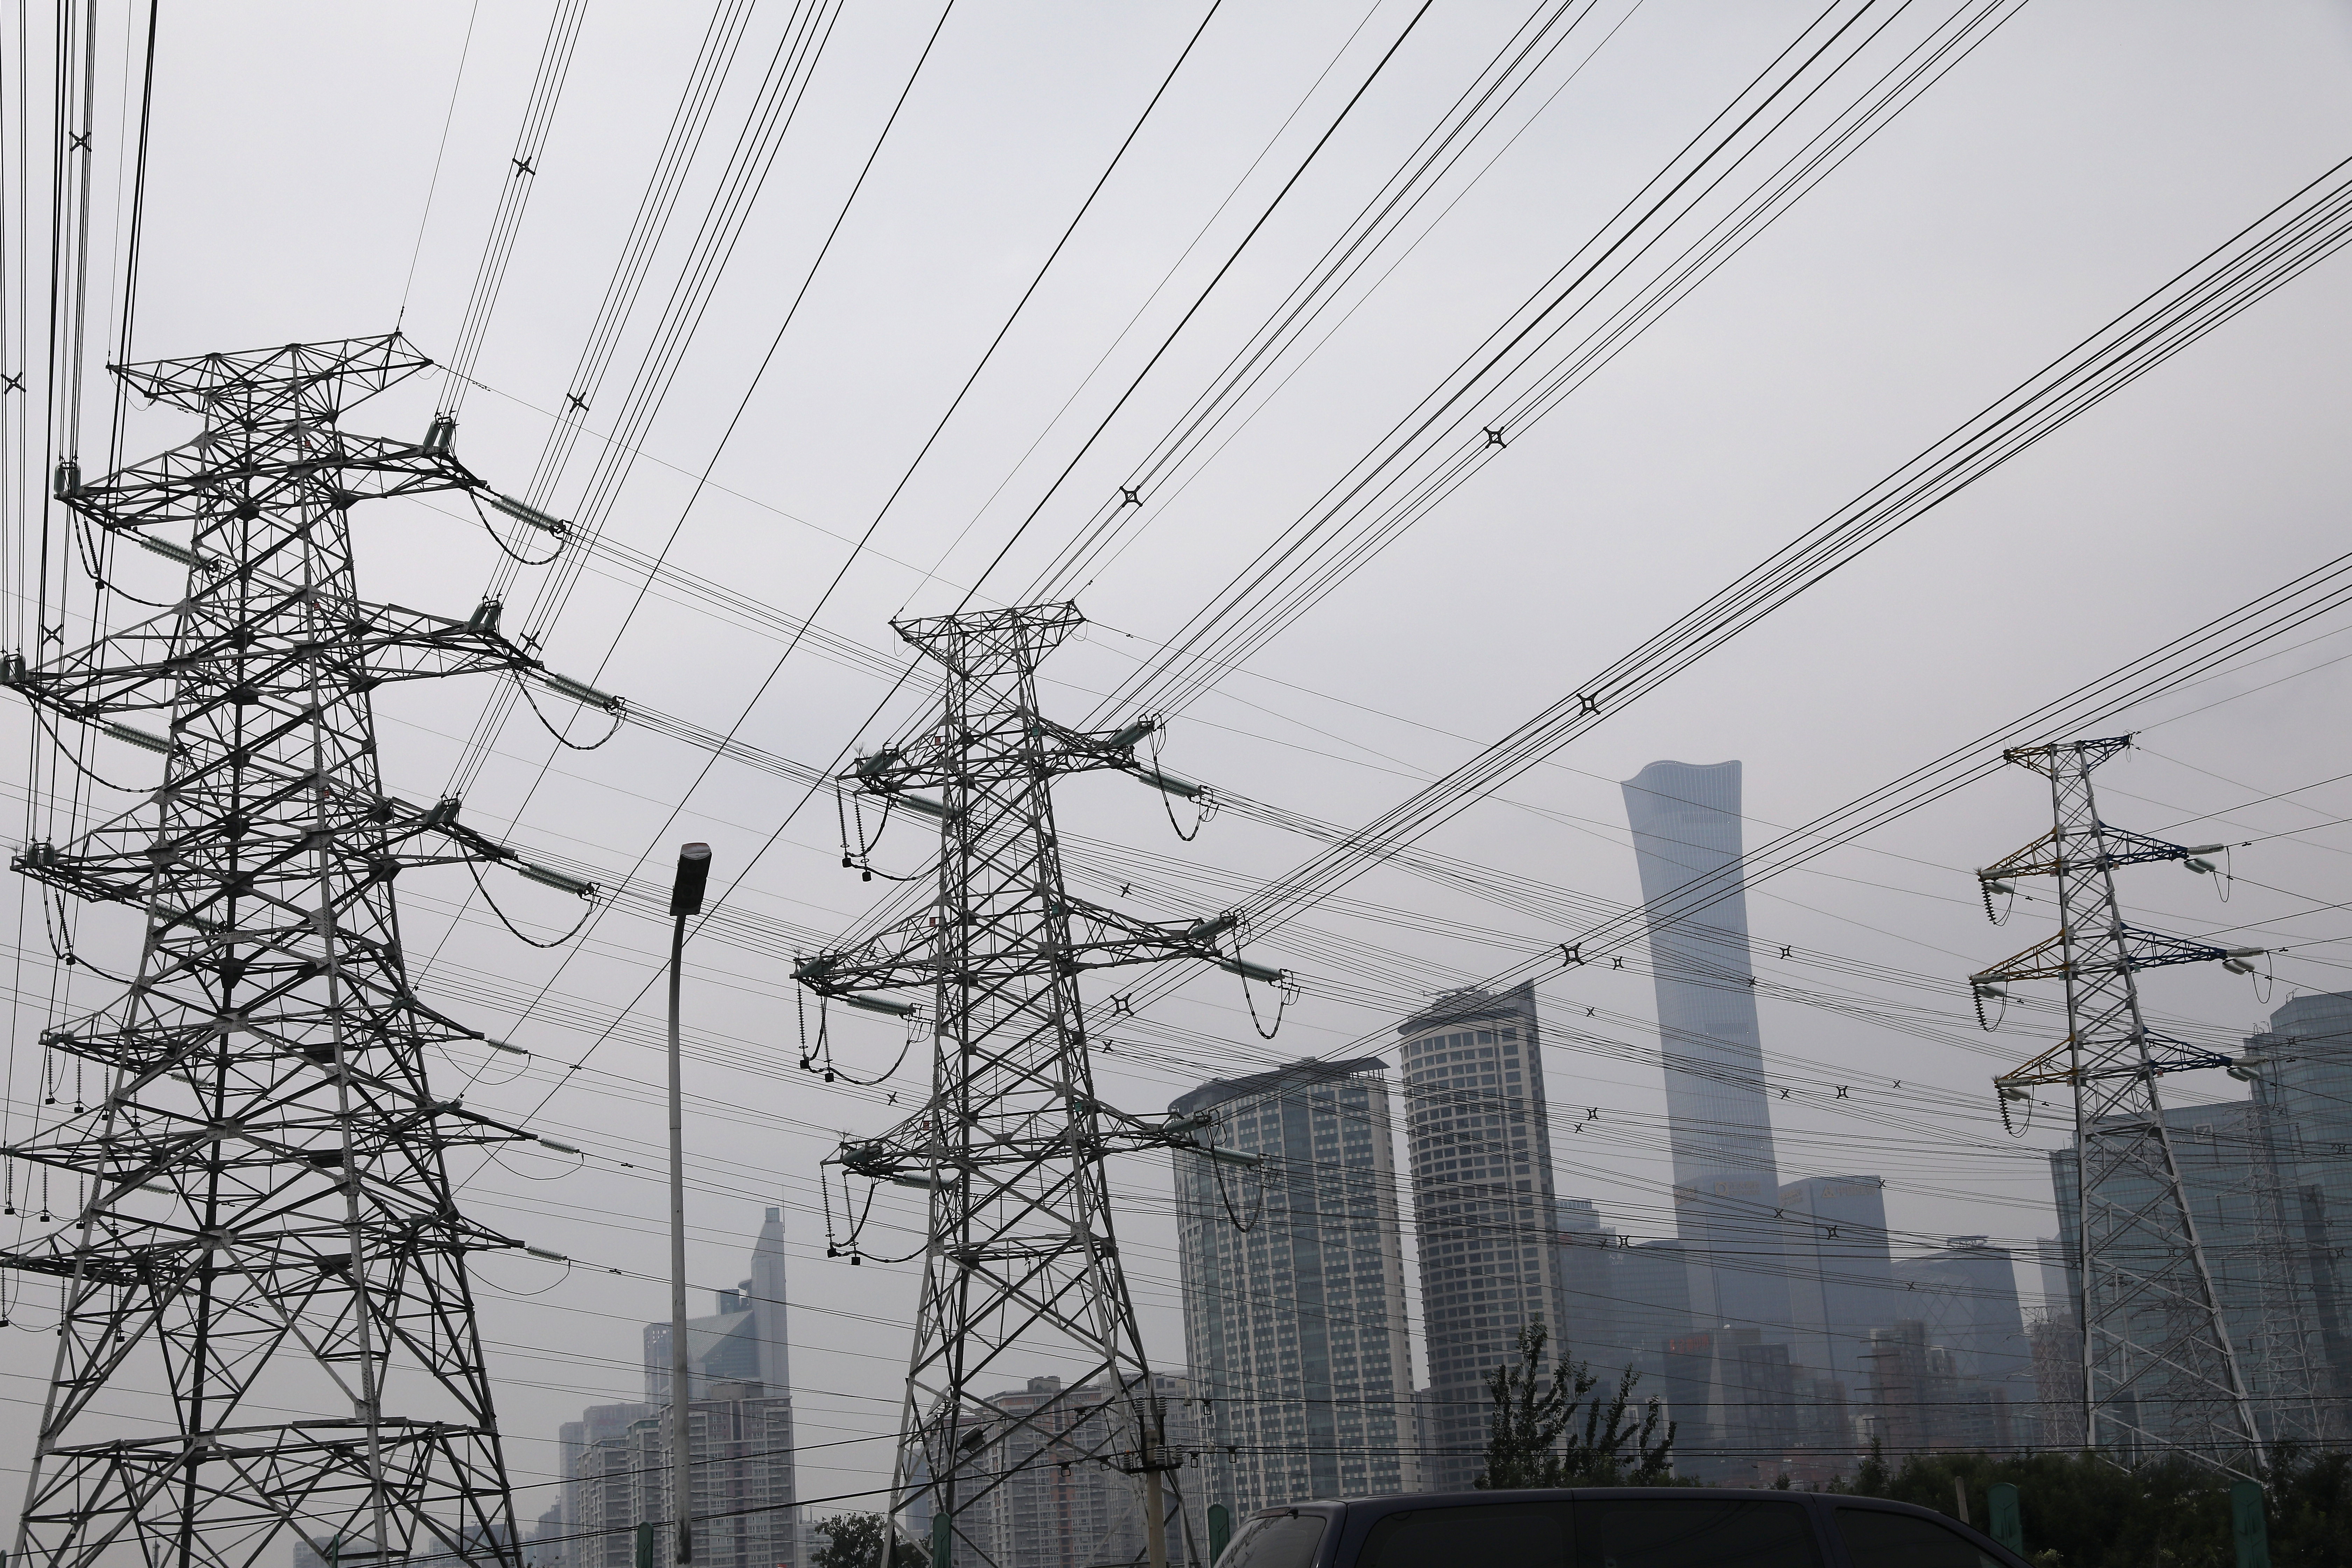 Electricity transmission towers near Beijing’s Central Business District (CBD)